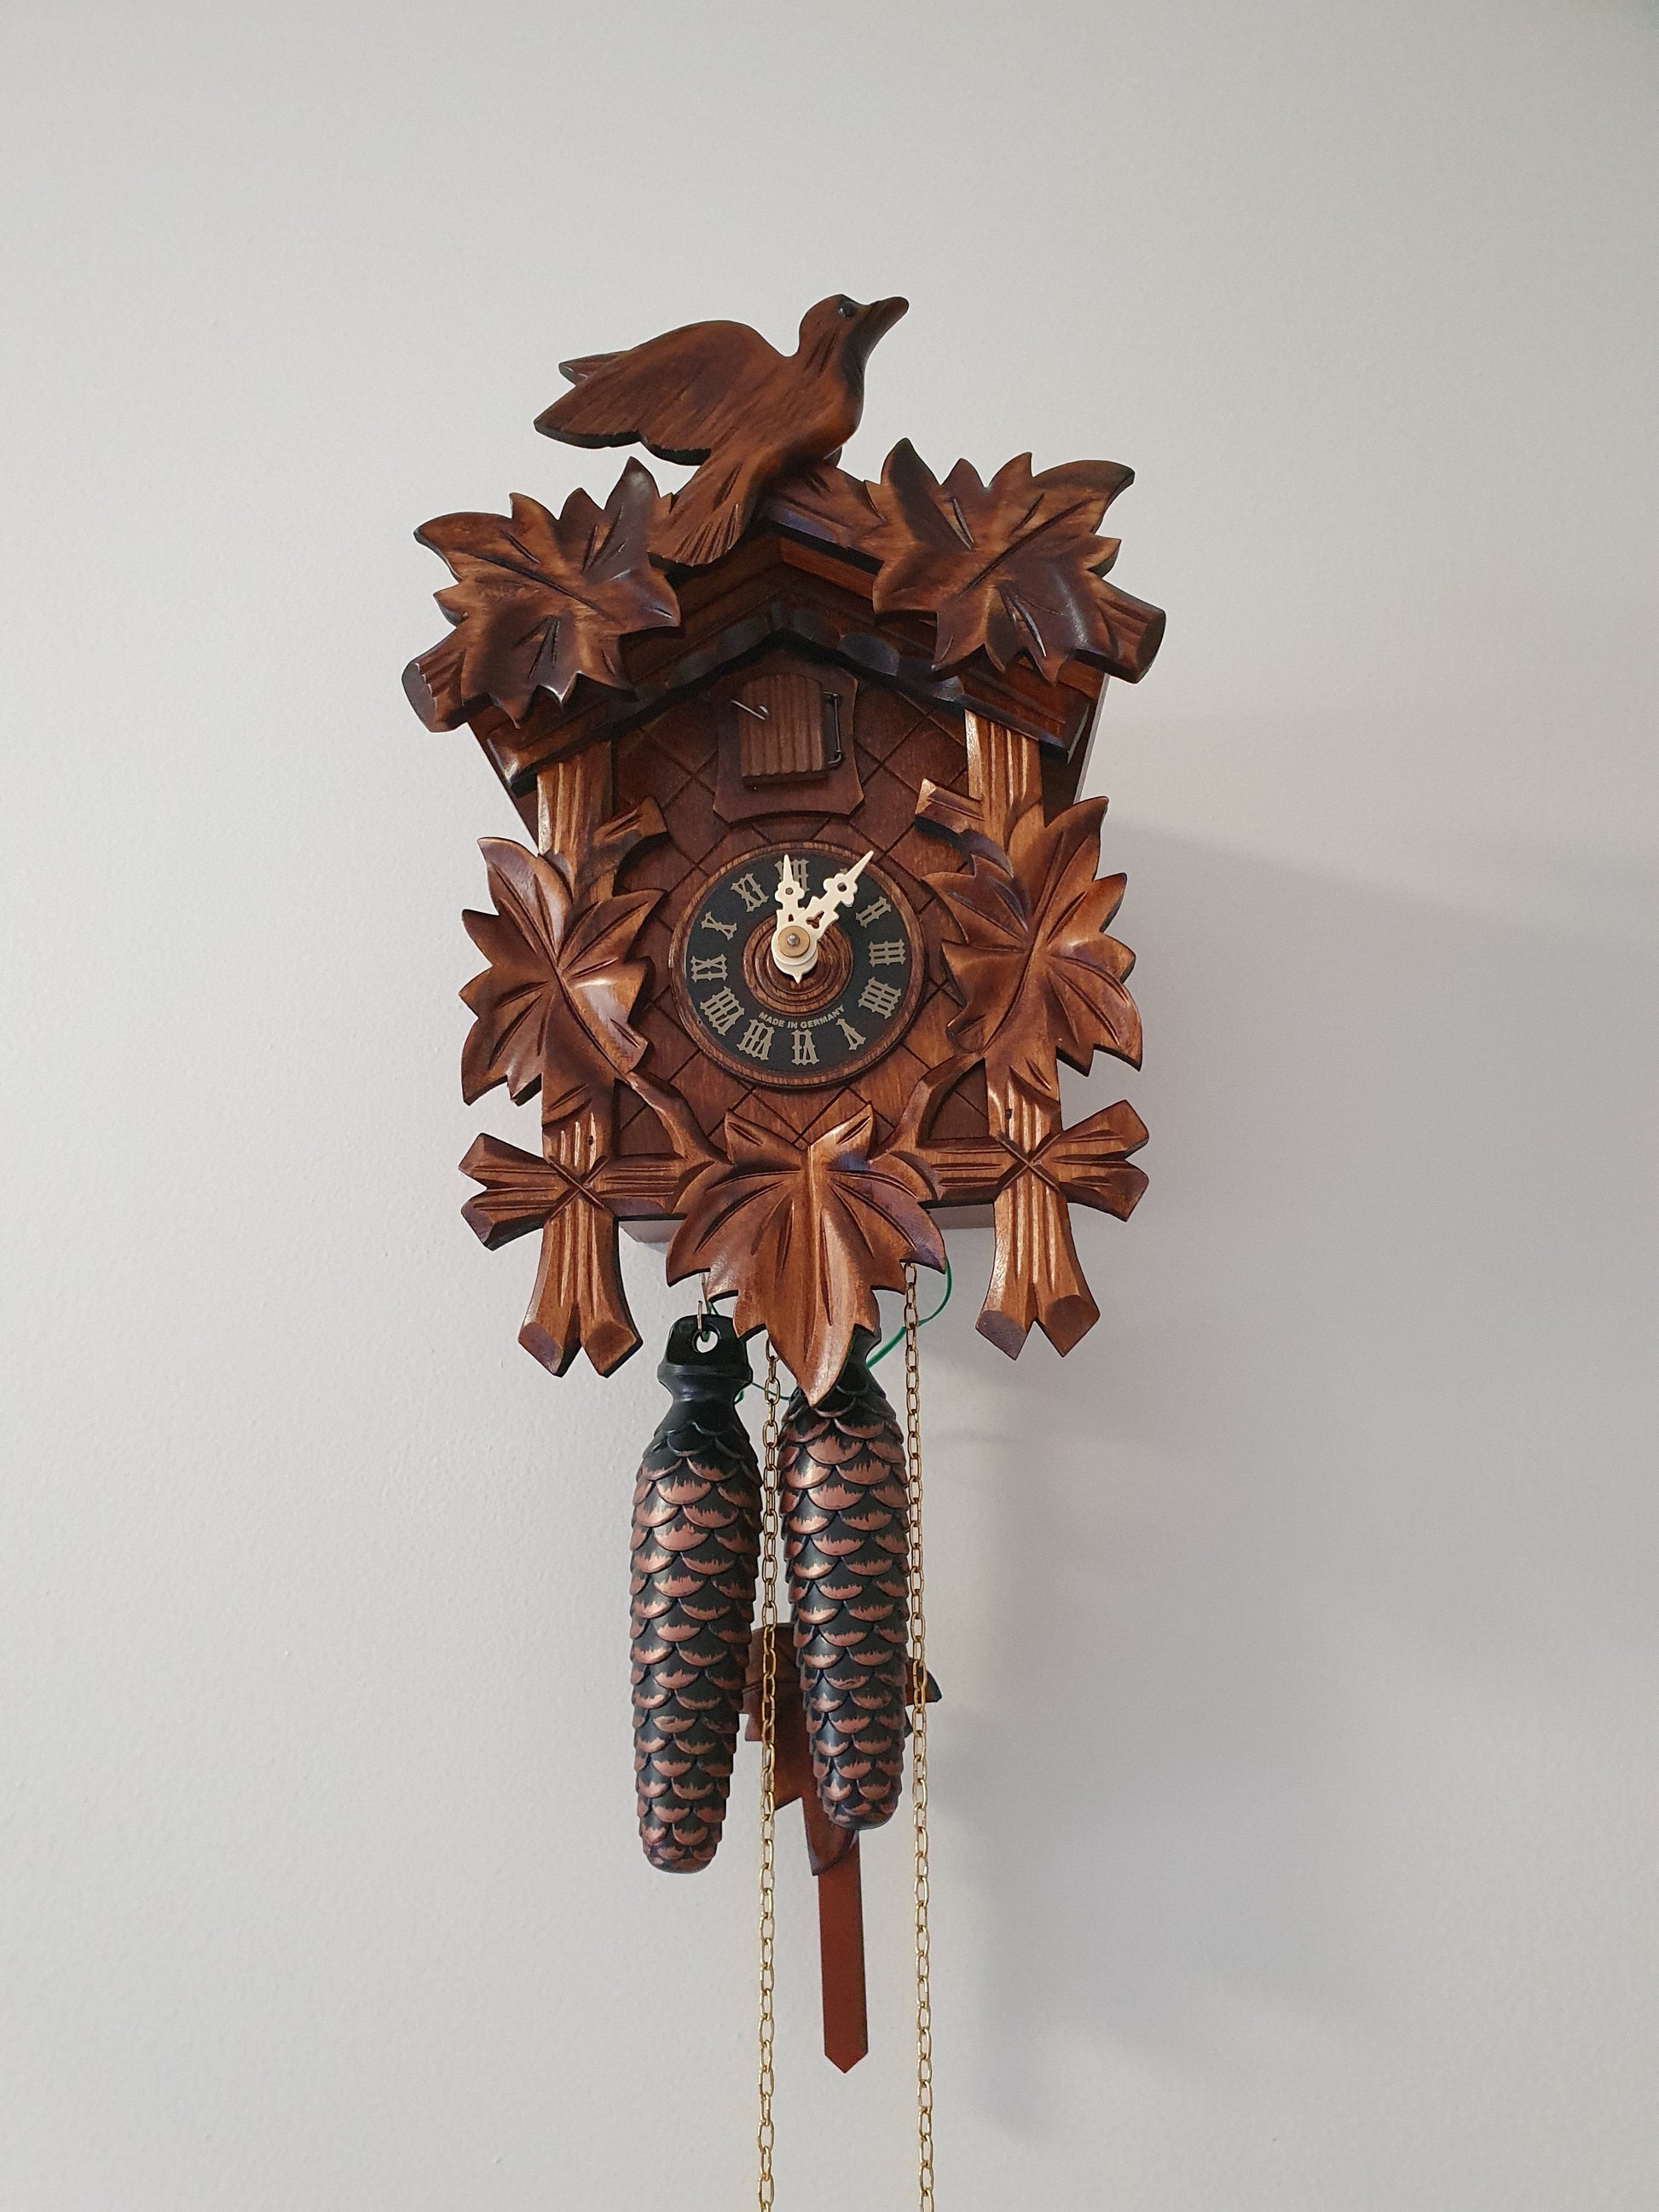 1 Day Mechanical Standard Cuckoo Clock. Made In The Black Forrest Germany With Free Delivery Across Australia. Cuckoo Clock [clocktyme.com] 